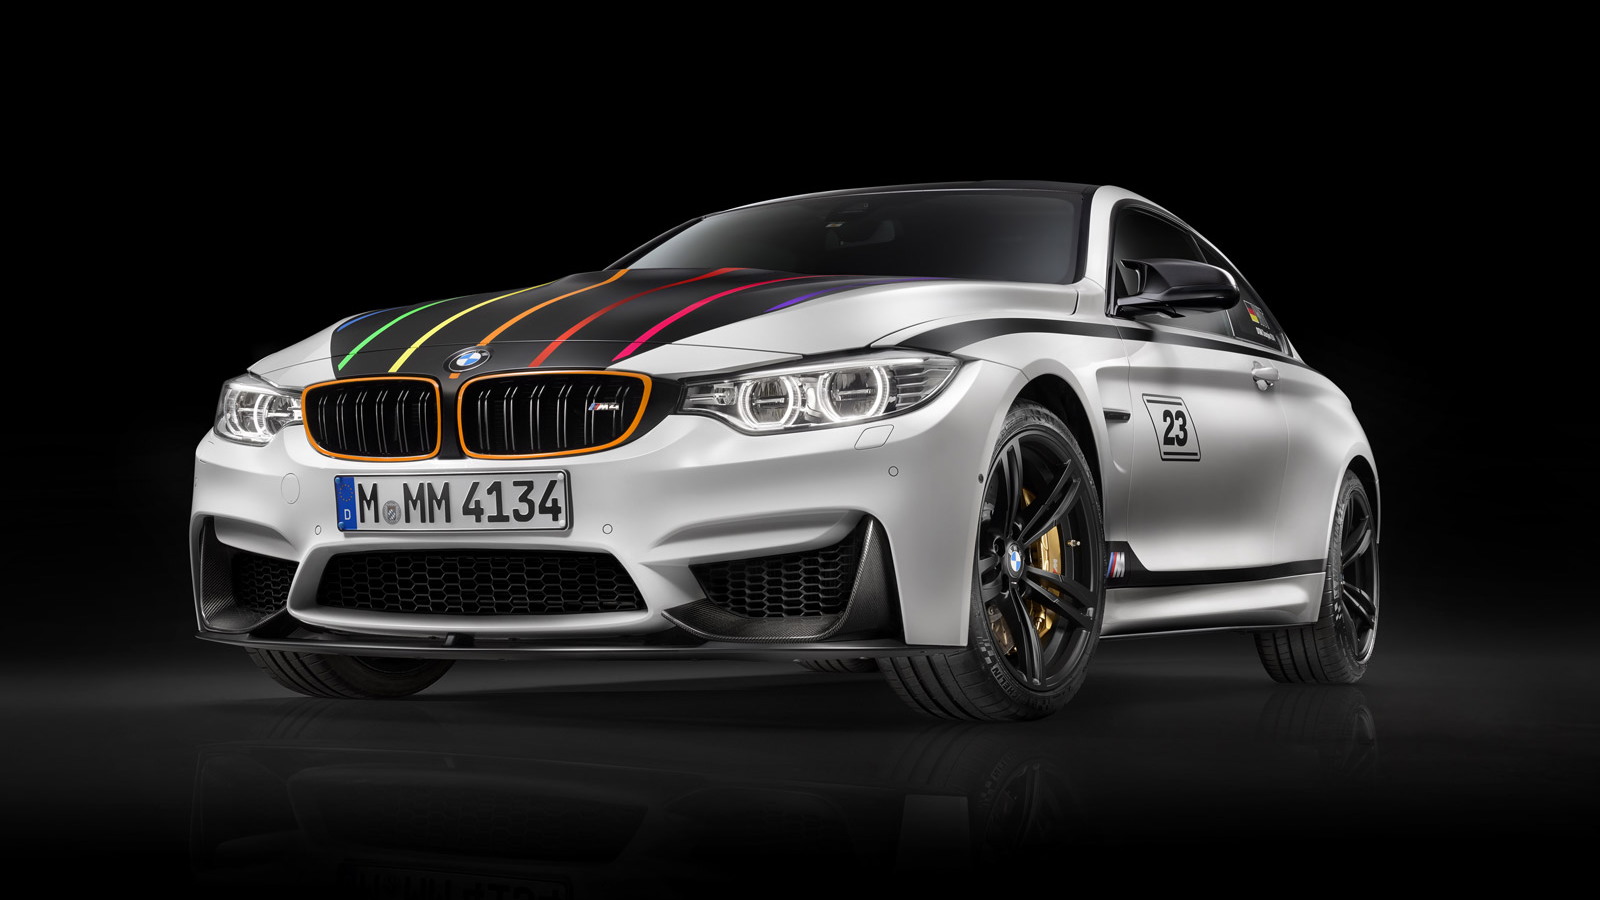 BMW M4 DTM Champion Edition unveiled at the Hockenheimring, October 19, 2014